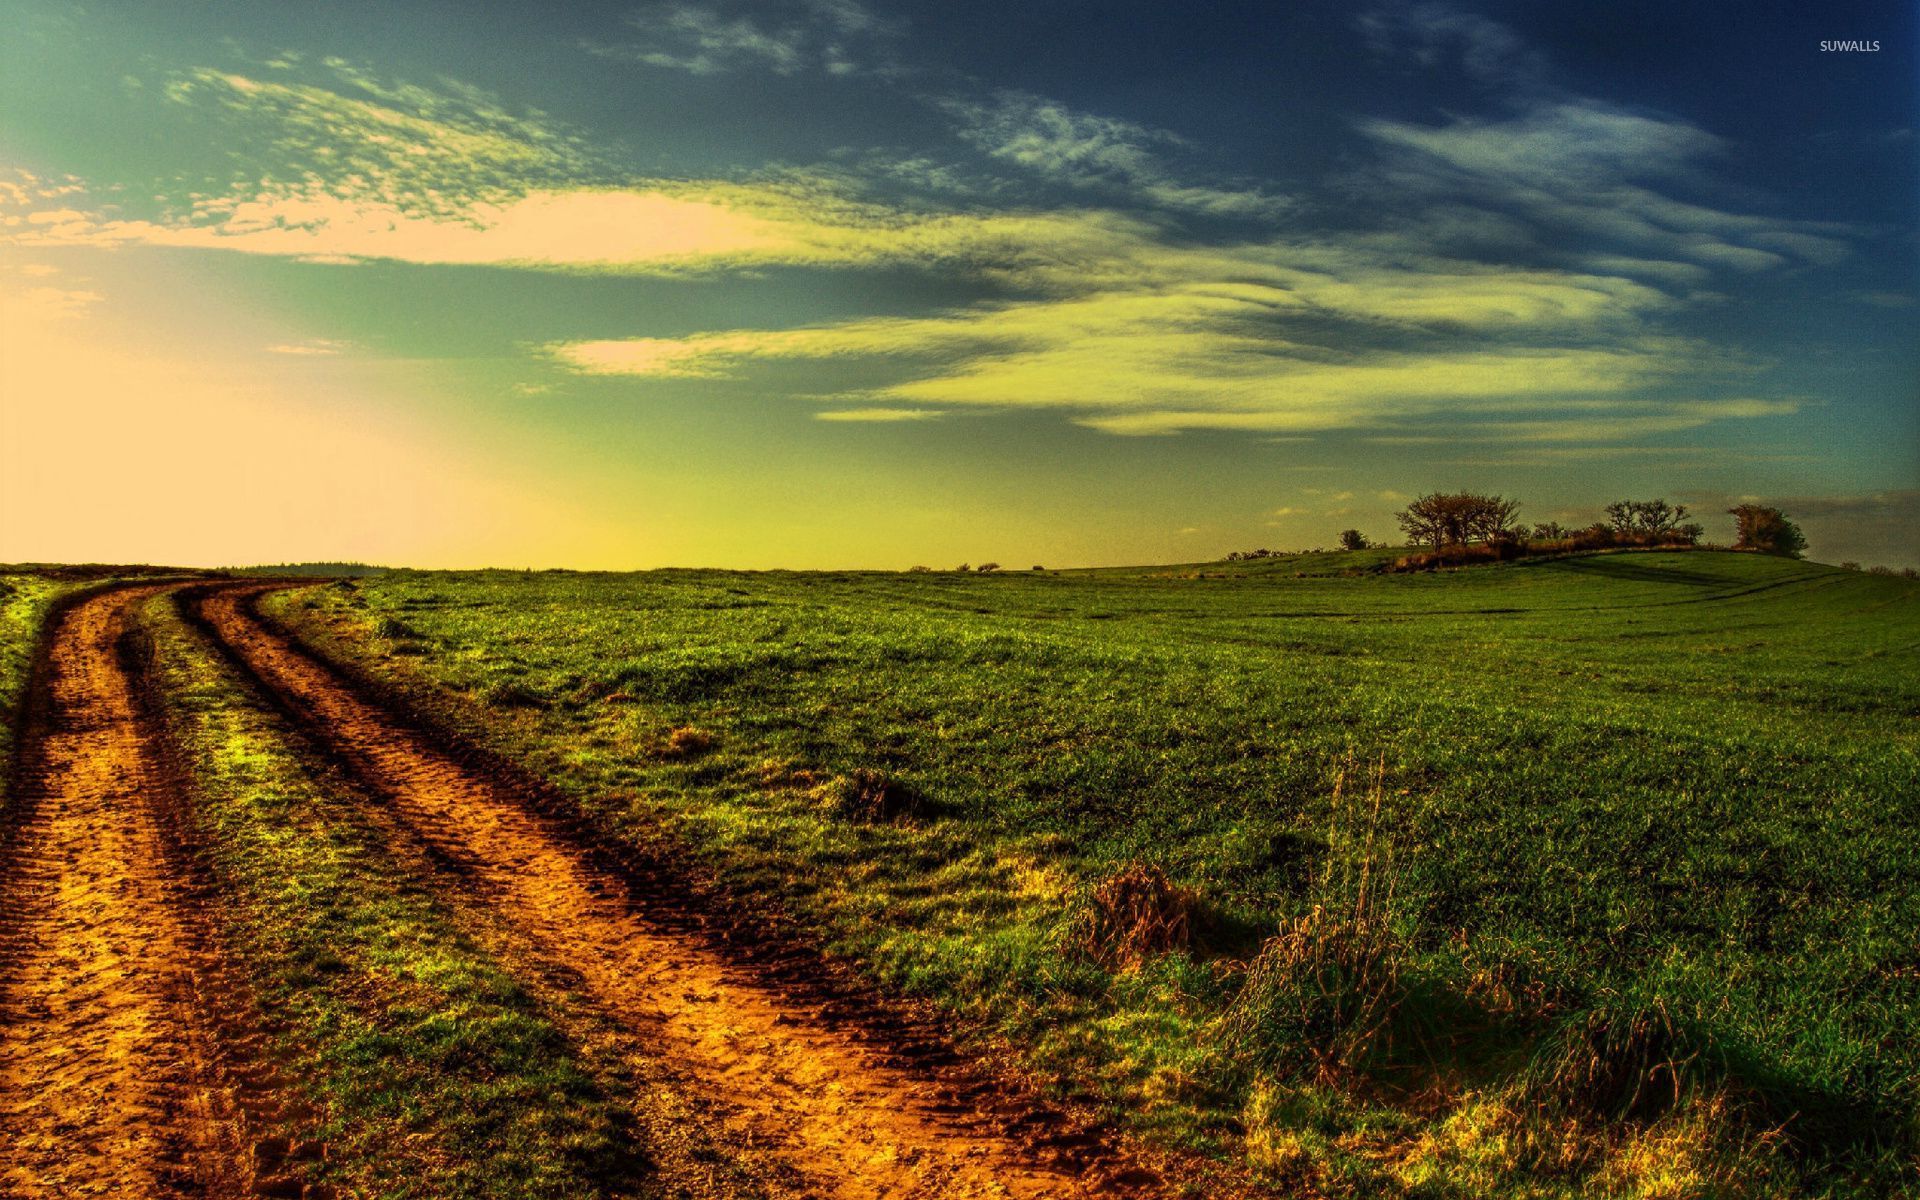 Car tracks through the green field wallpaper - Nature wallpapers - #27145